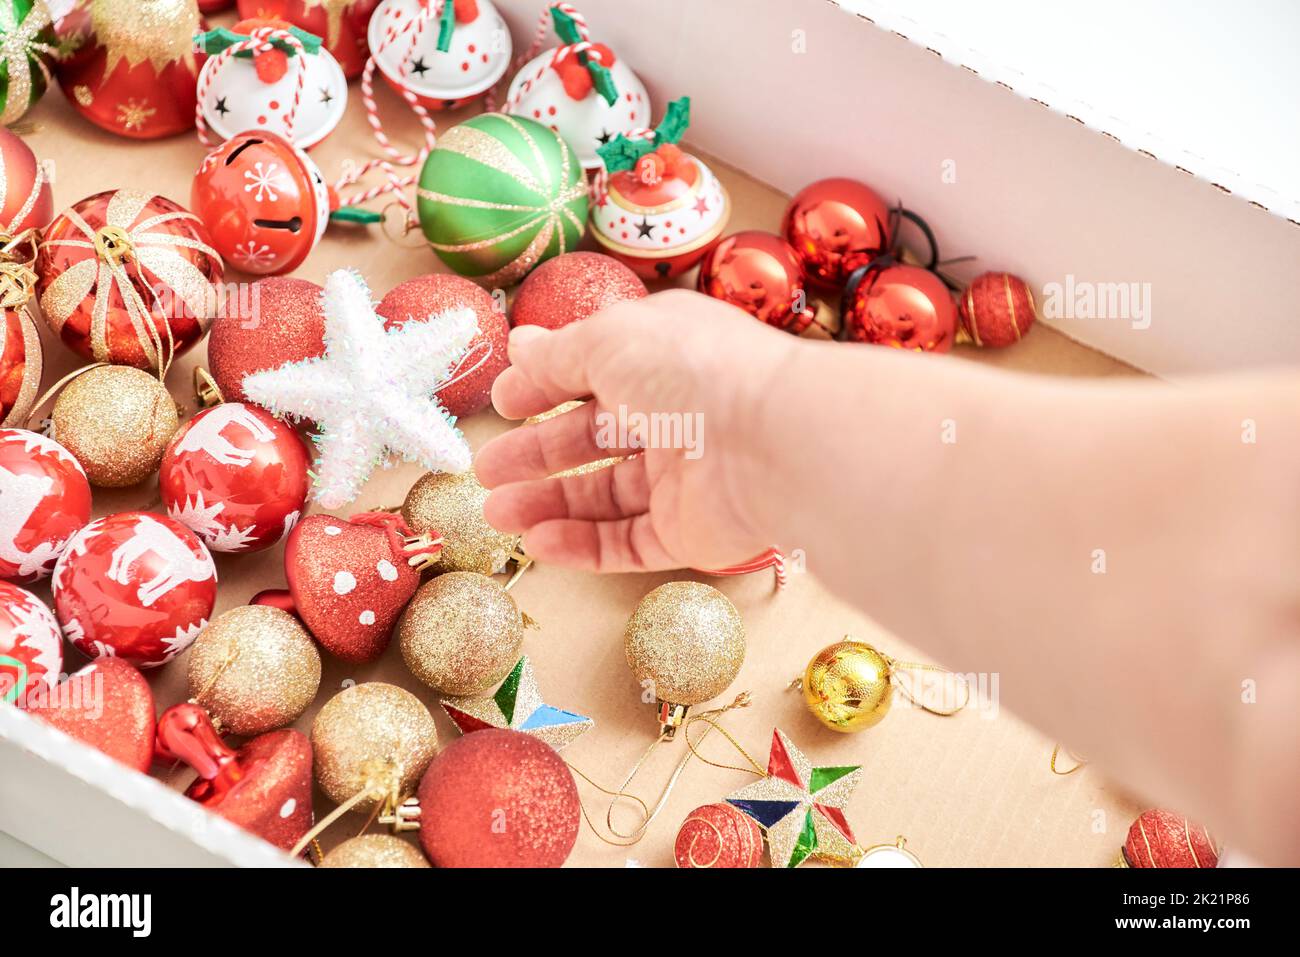 Female hand grabbing ornaments from a box of mixed Christmas tree balls, stars and bells in the classic traditional colors of red, green, white and go Stock Photo